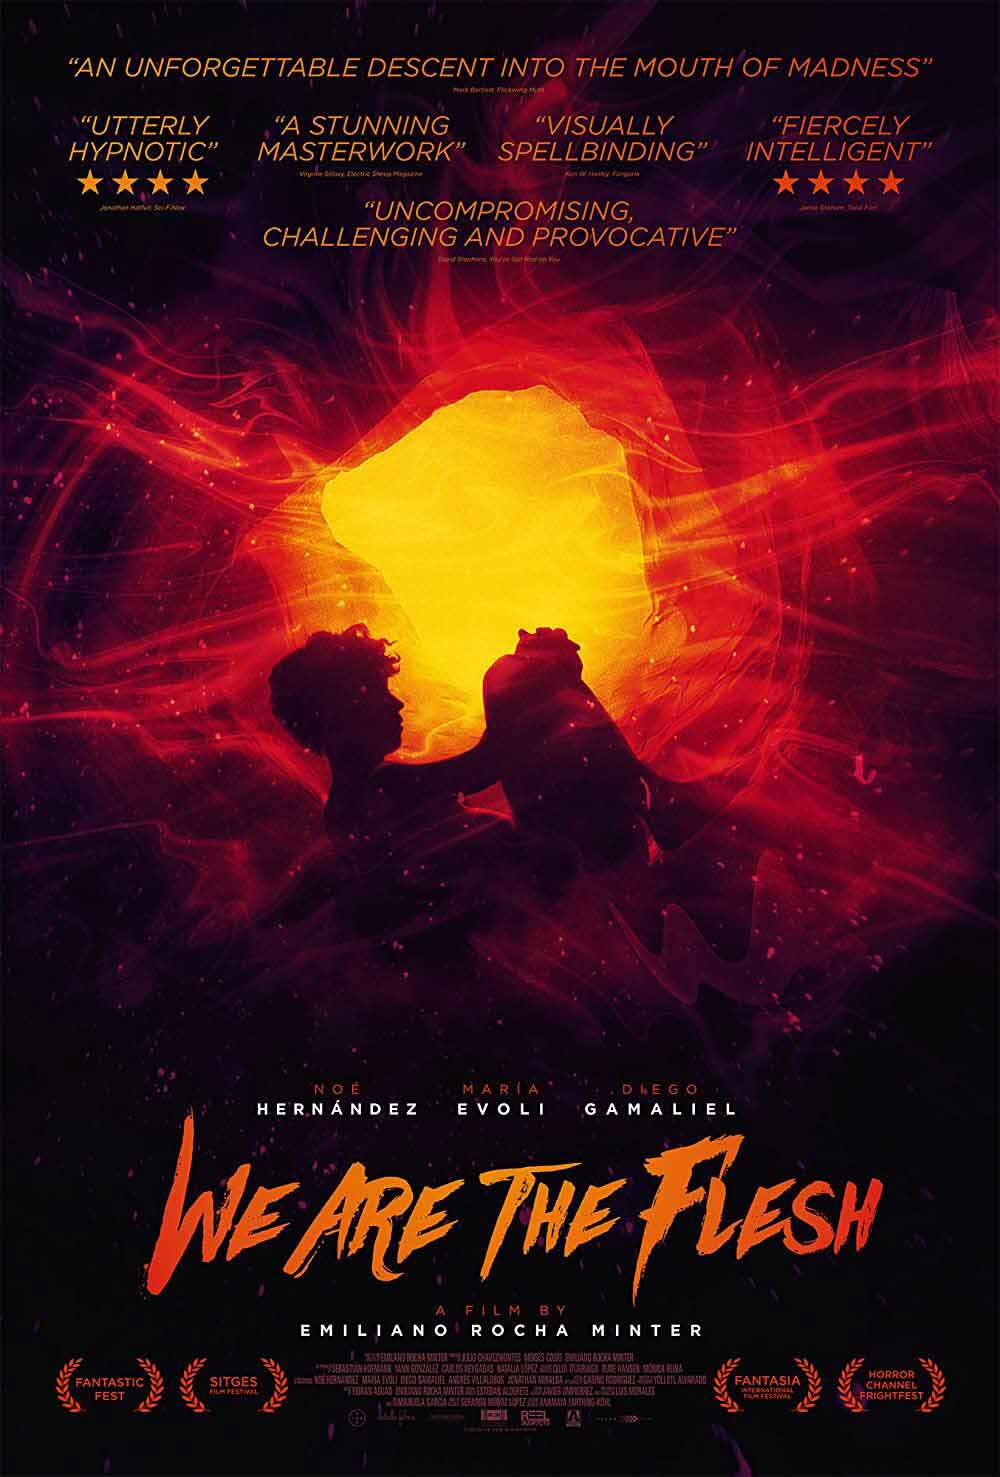 We are the flesh horror movie poster